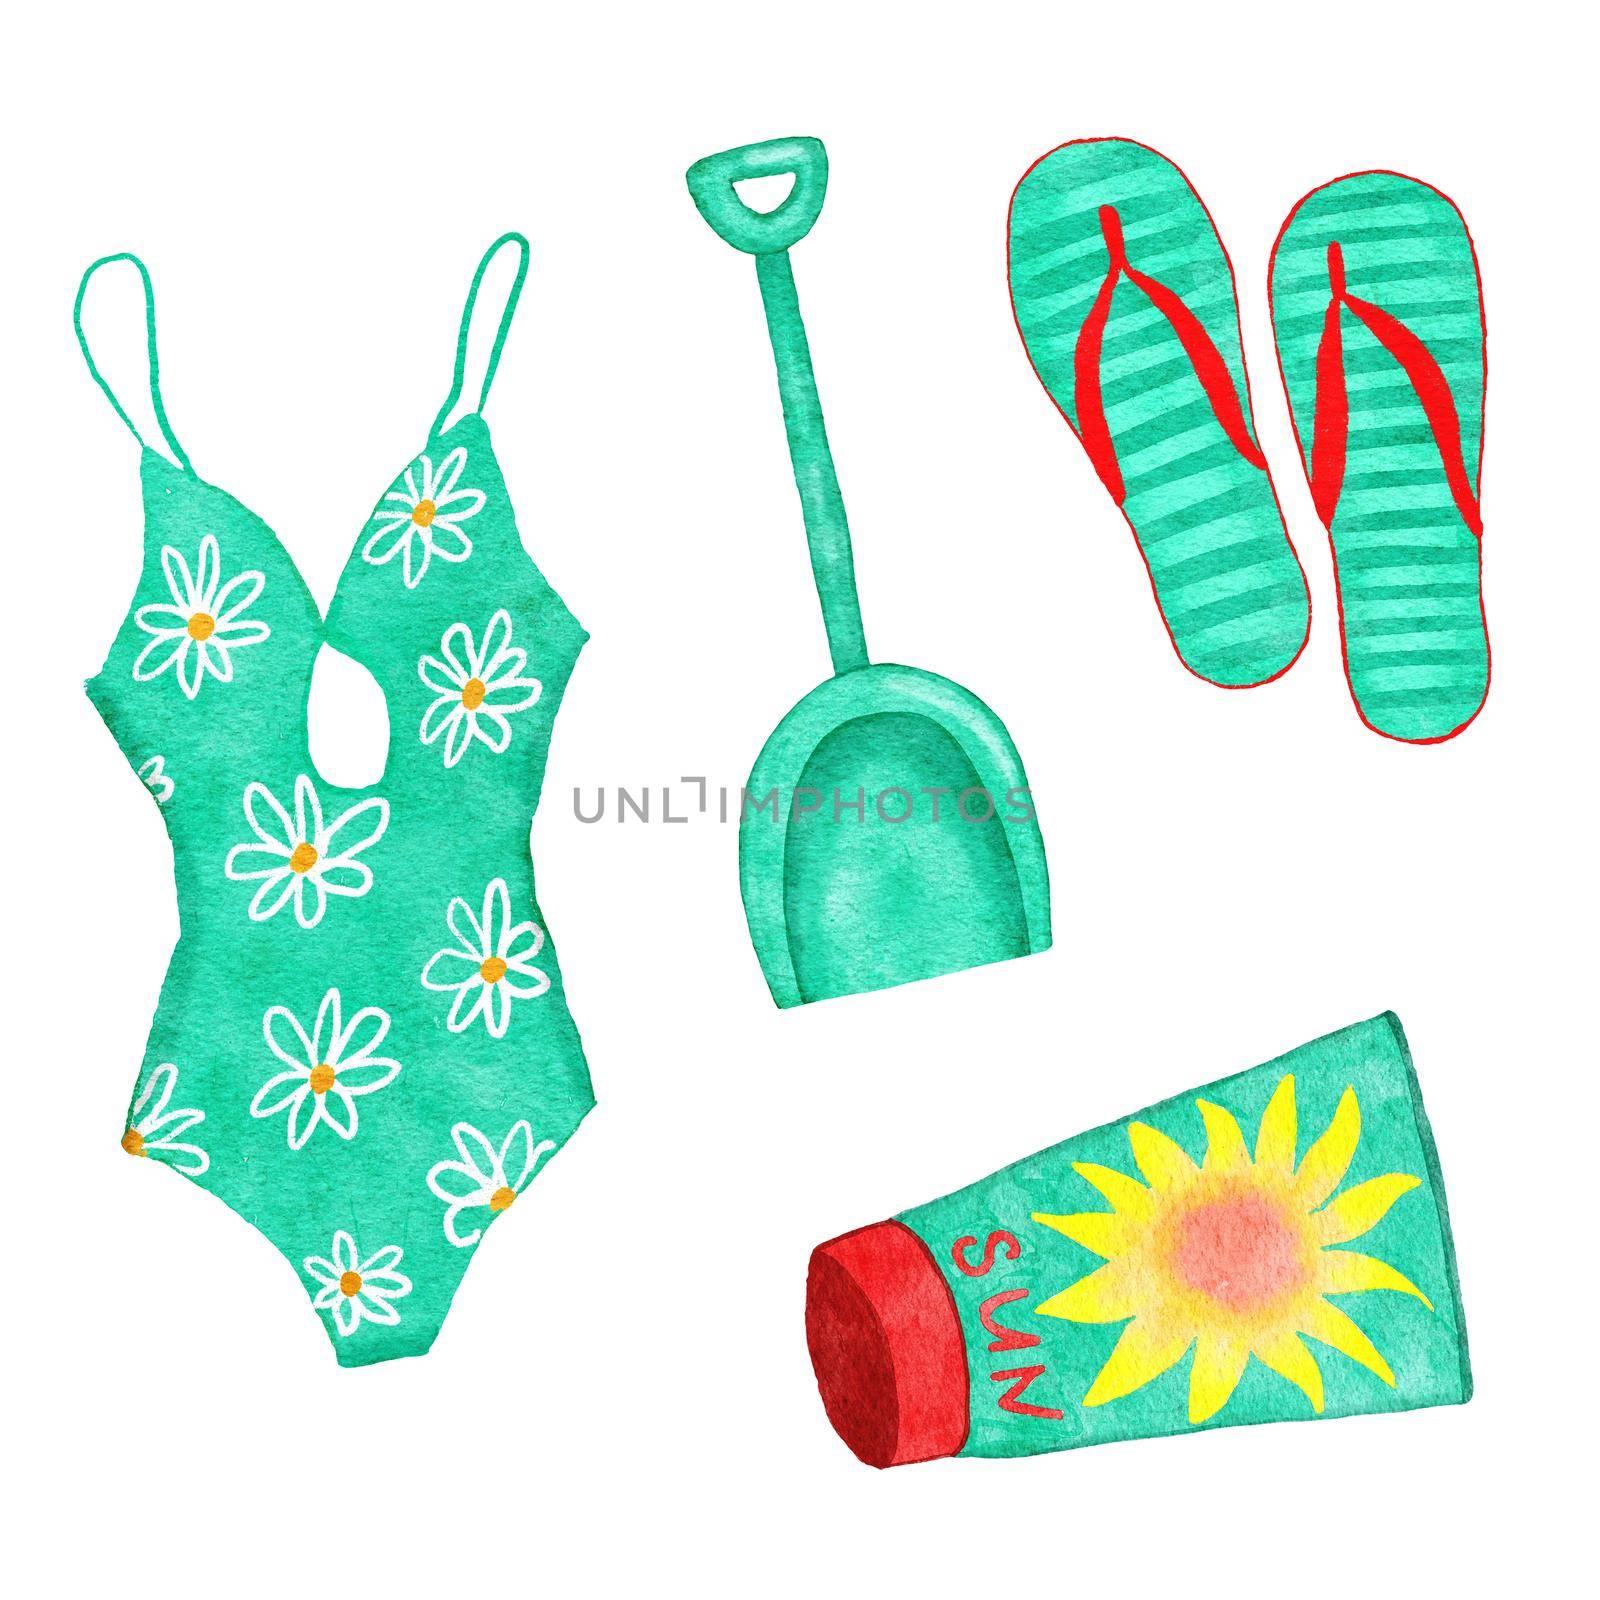 Watecolor hand drawn illsutration in turquoise red yellow colors of swimsuit swimwear bikini, beach shovel striped flip-flops sandals, suntan spf cream. Beach ocean sea holiday vacation elements, colorful bright design clipart. by Lagmar